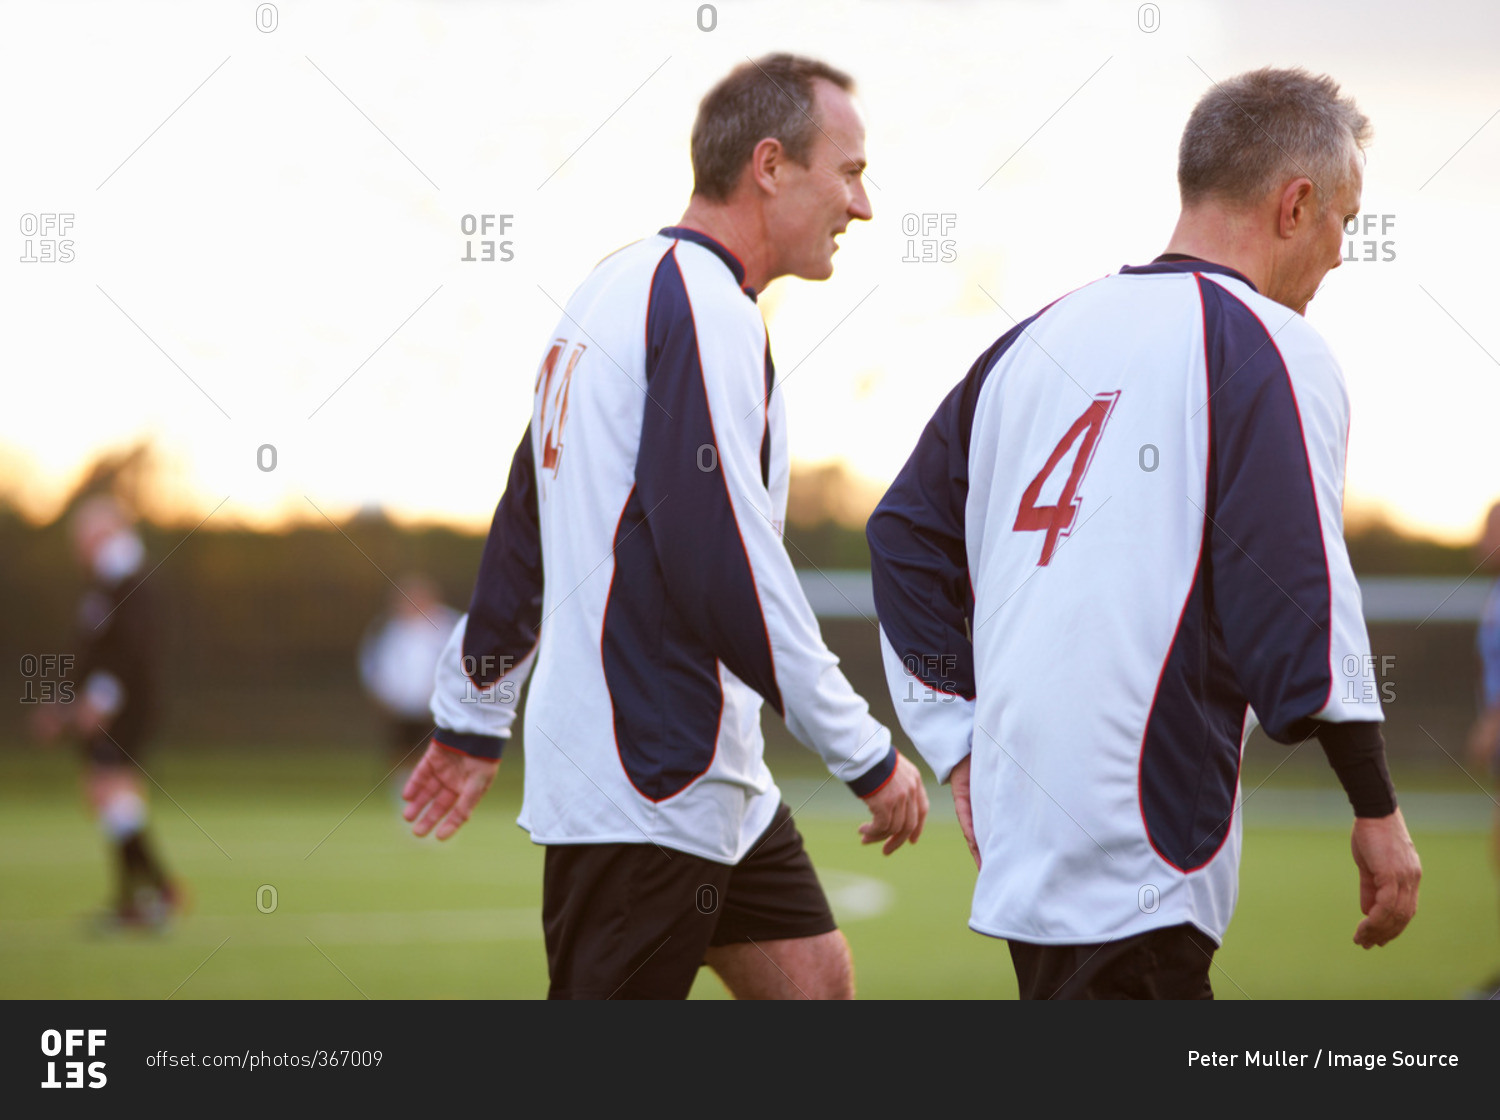 Soccer players at stop in game